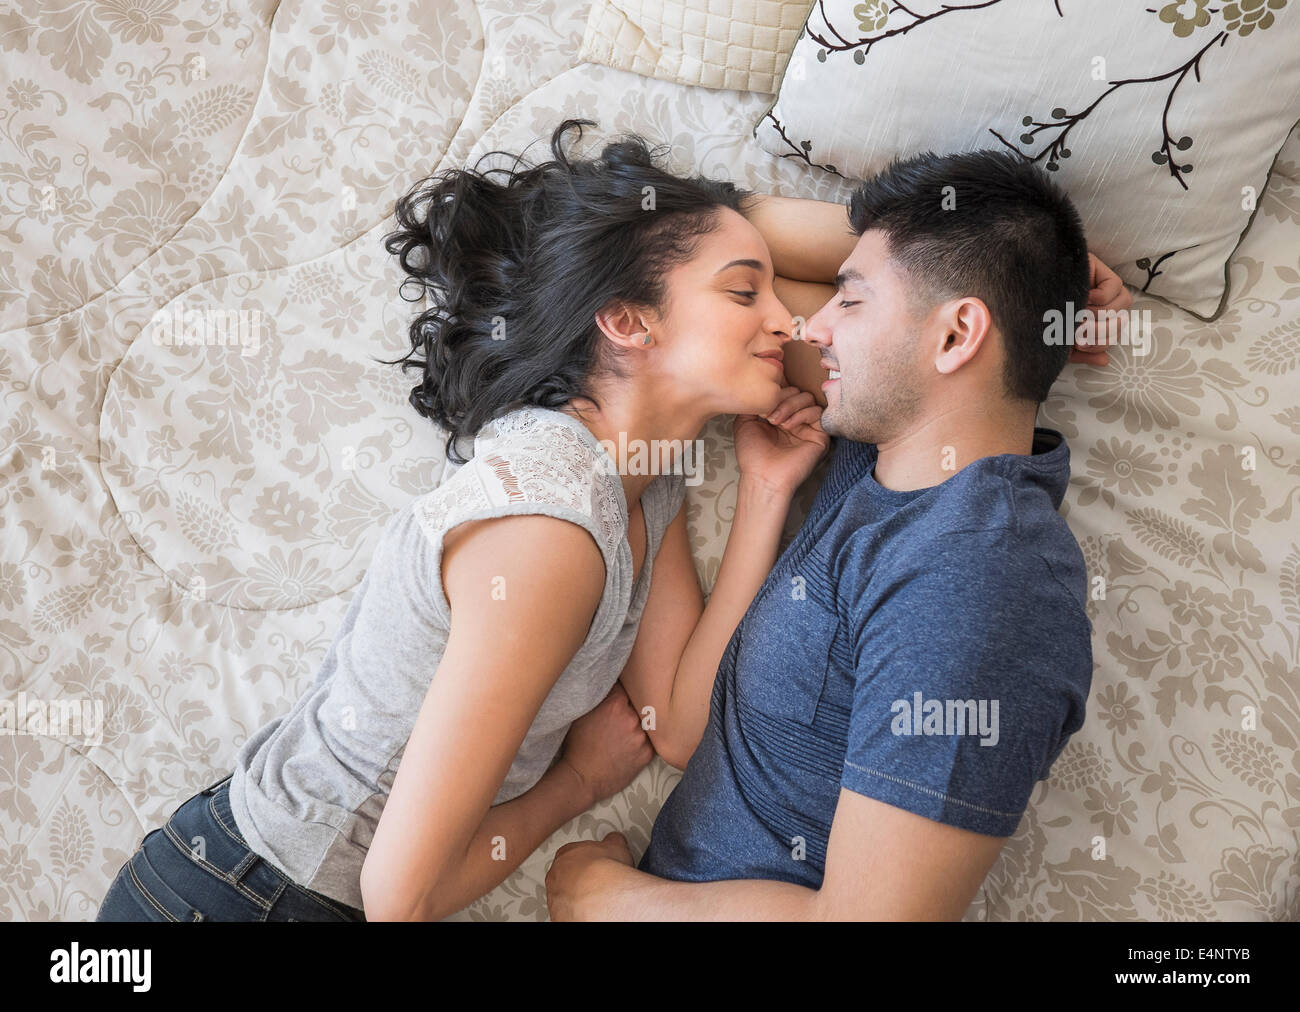 Young couple lying on bed Stock Photo